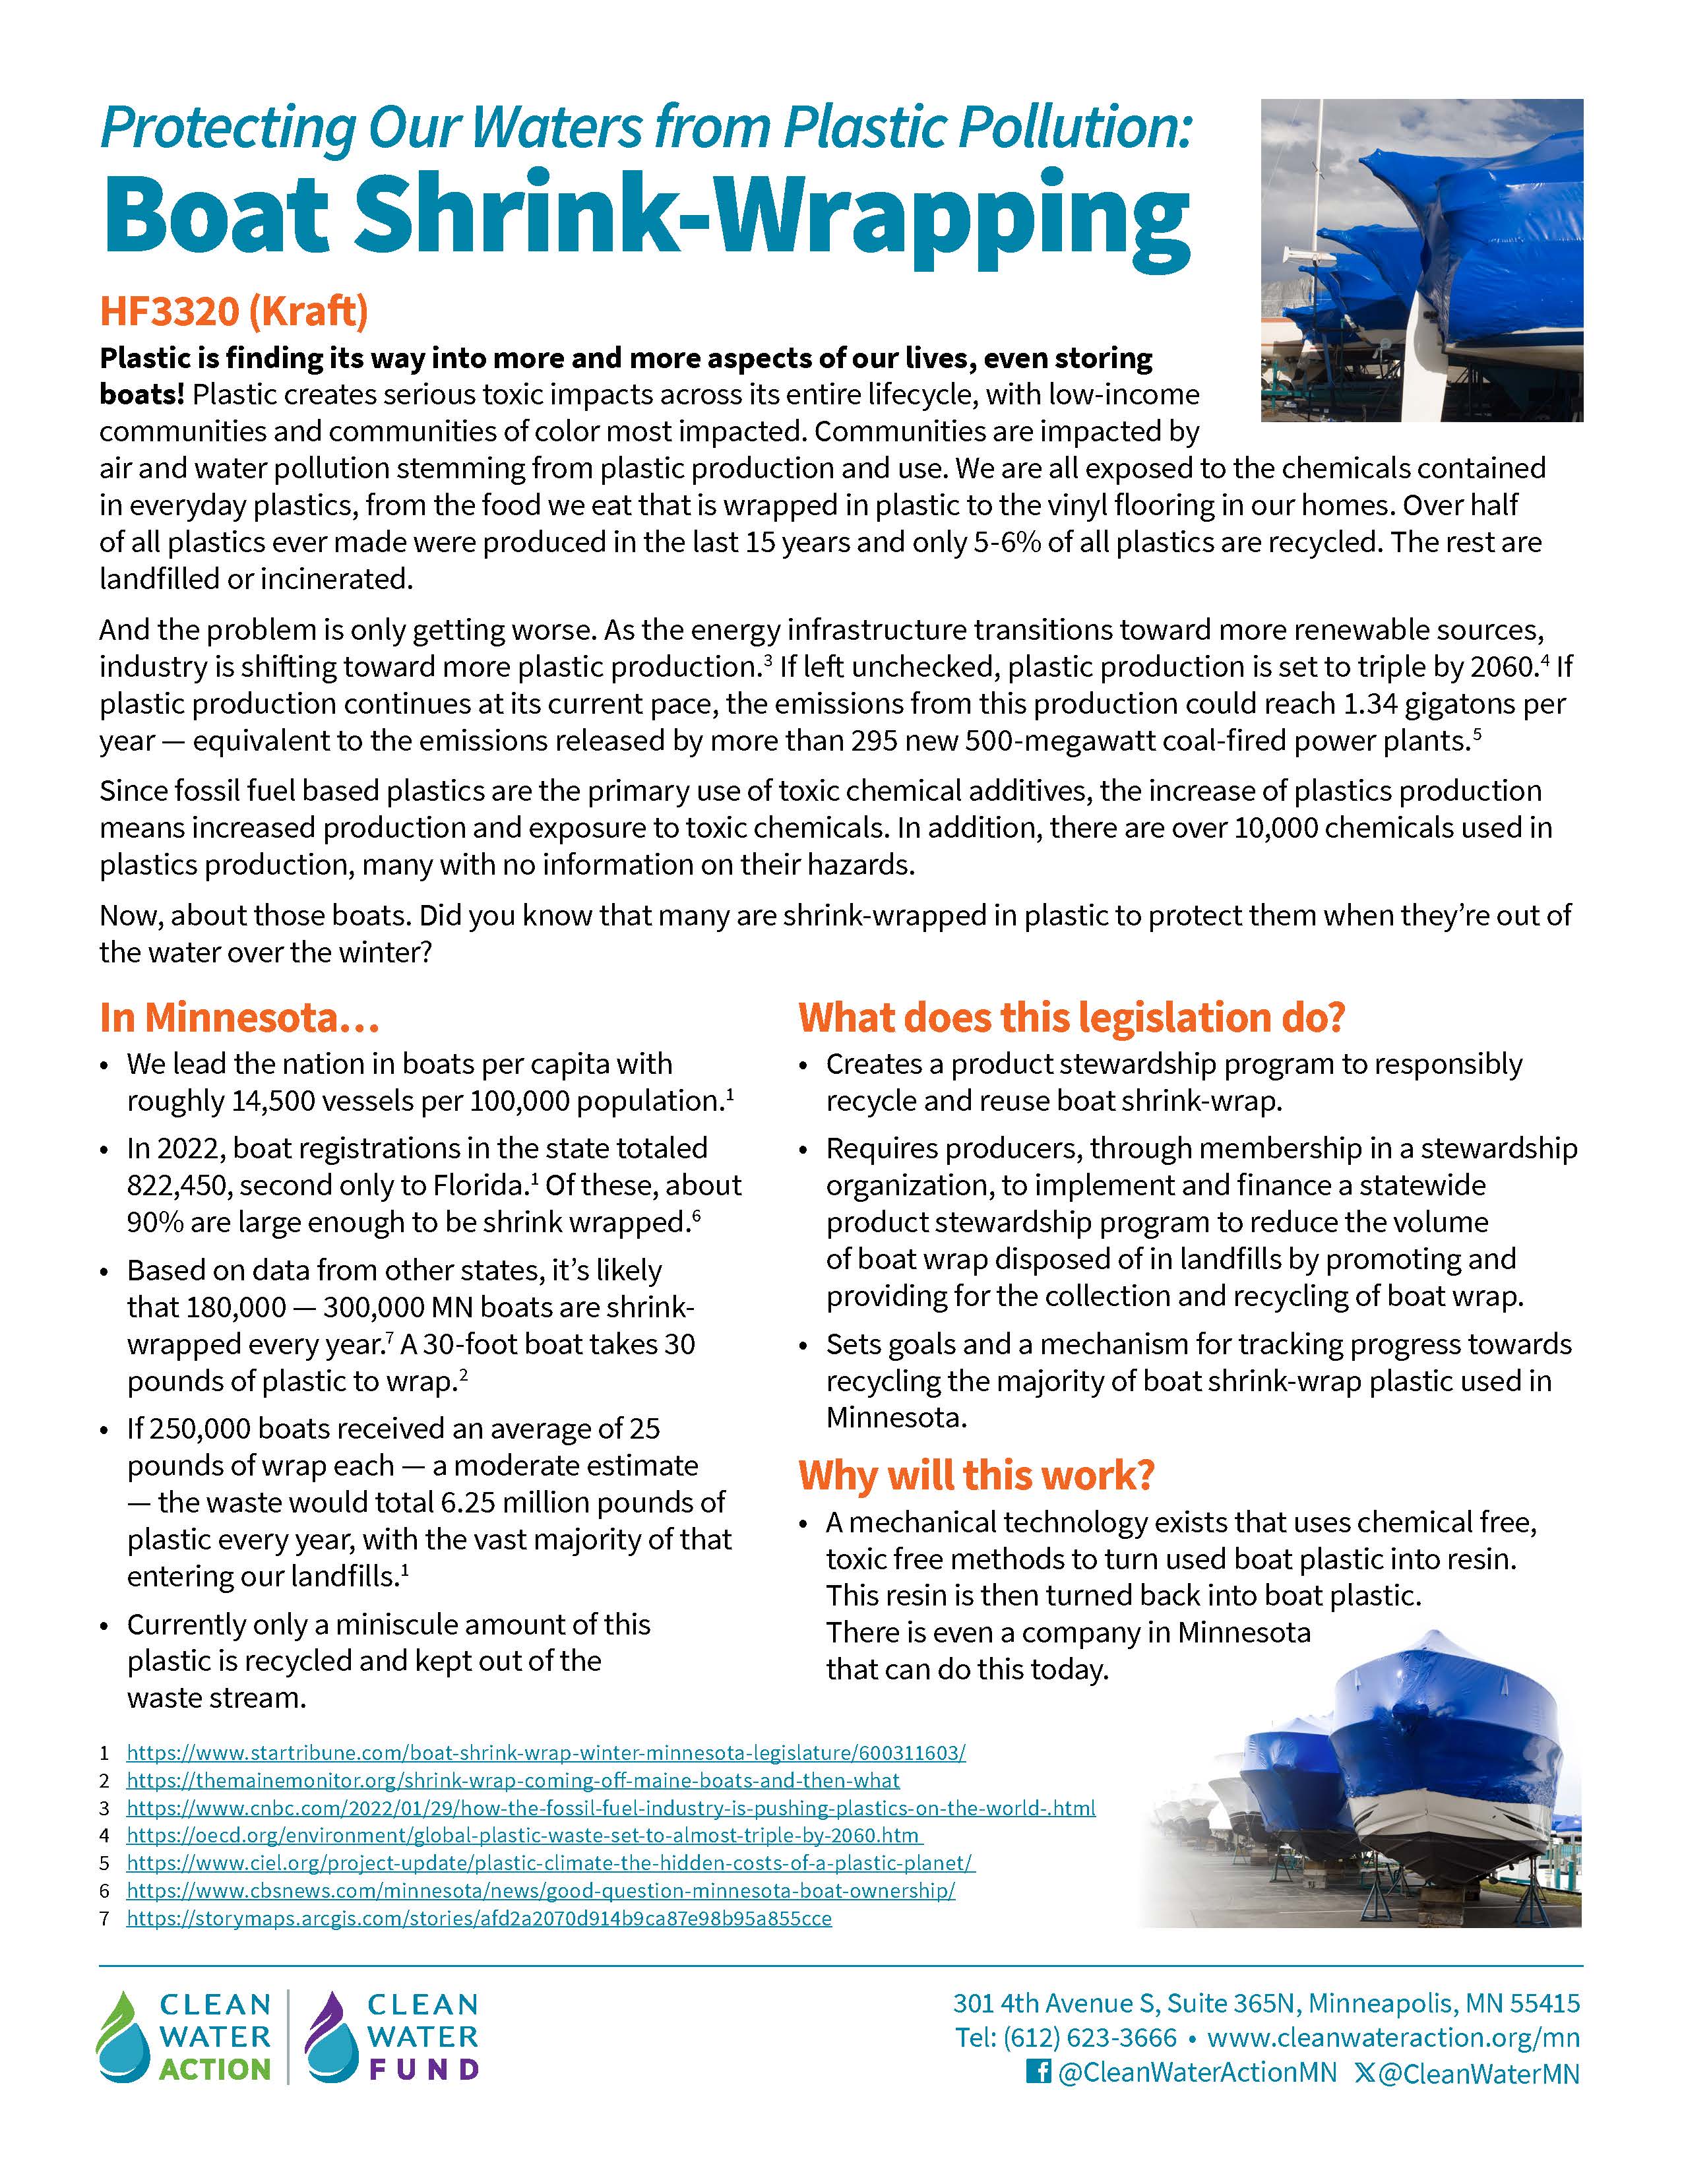 Factsheet - Protecting Our Waters from Plastic Pollution: Boat Shrink-Wrapping in Minnesota